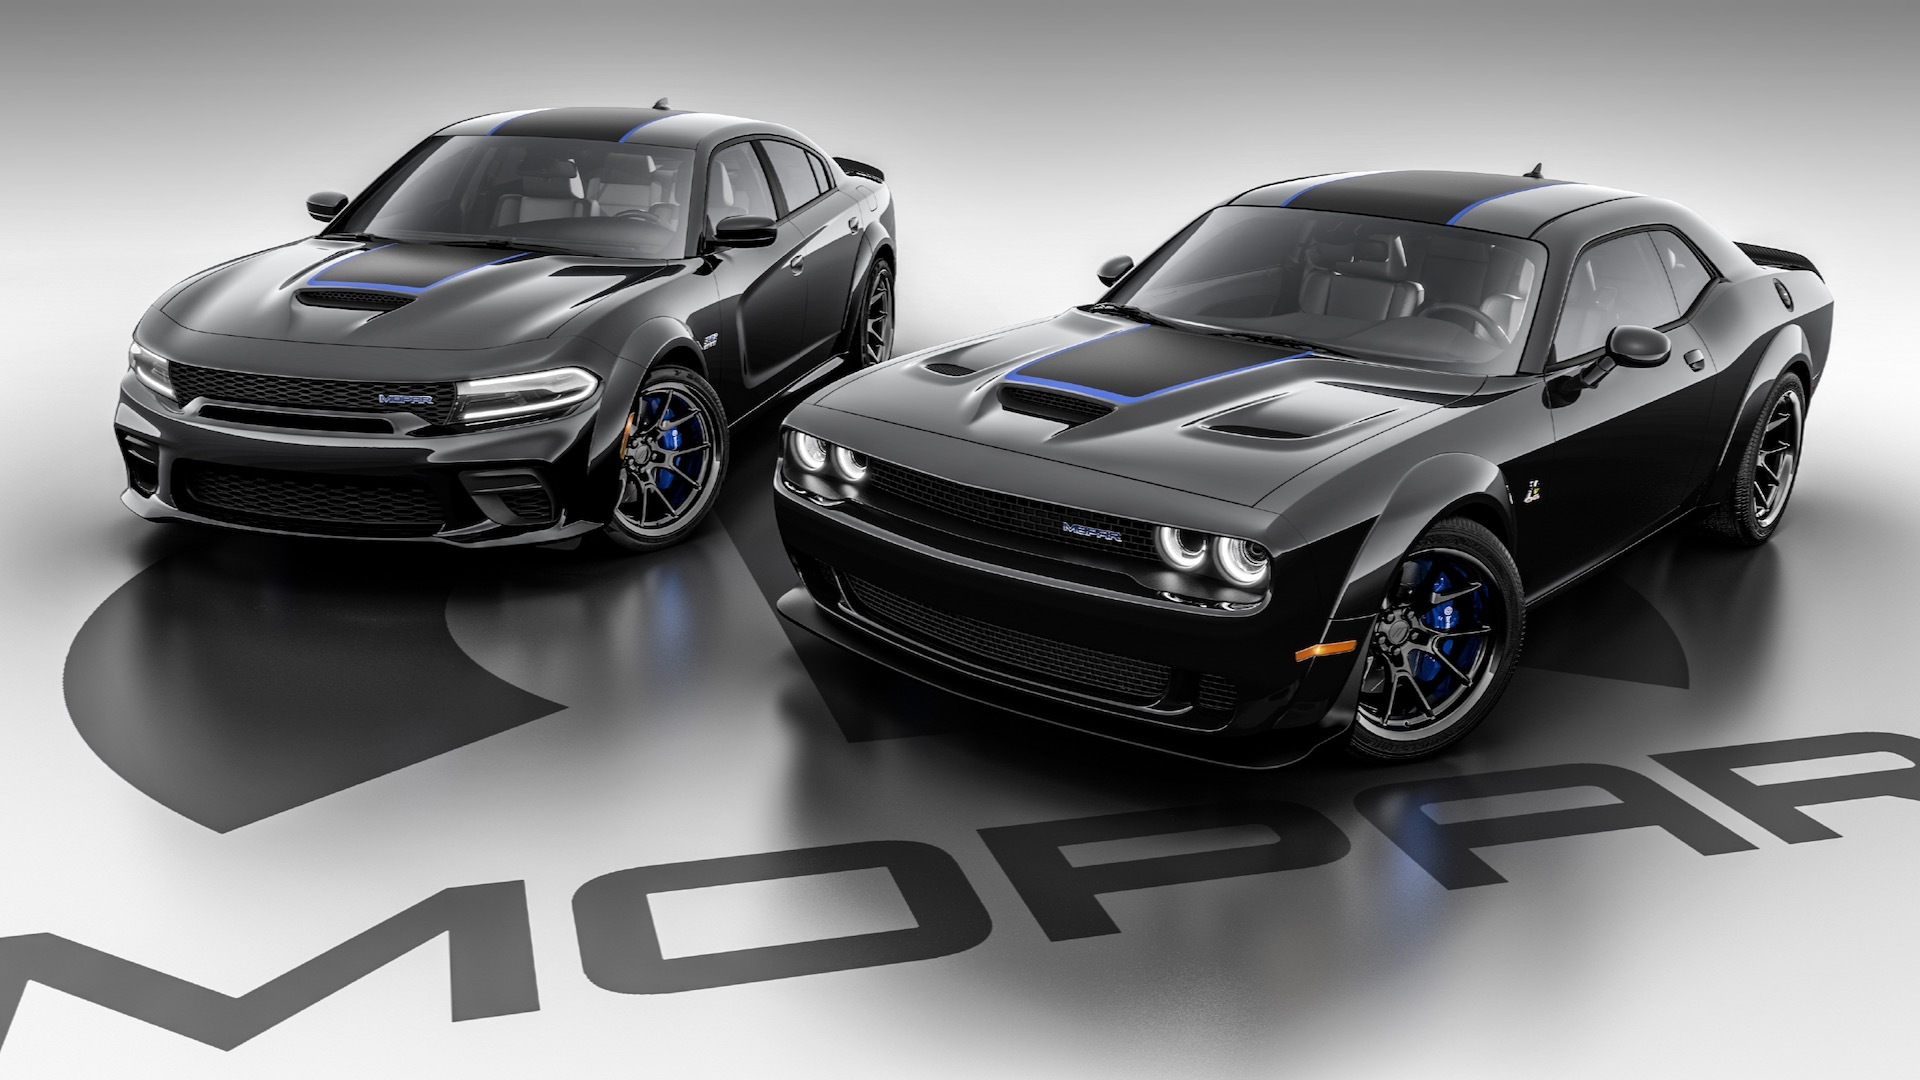 2023 Dodge Challenger and 2023 Dodge Charger Mopar '23 editions